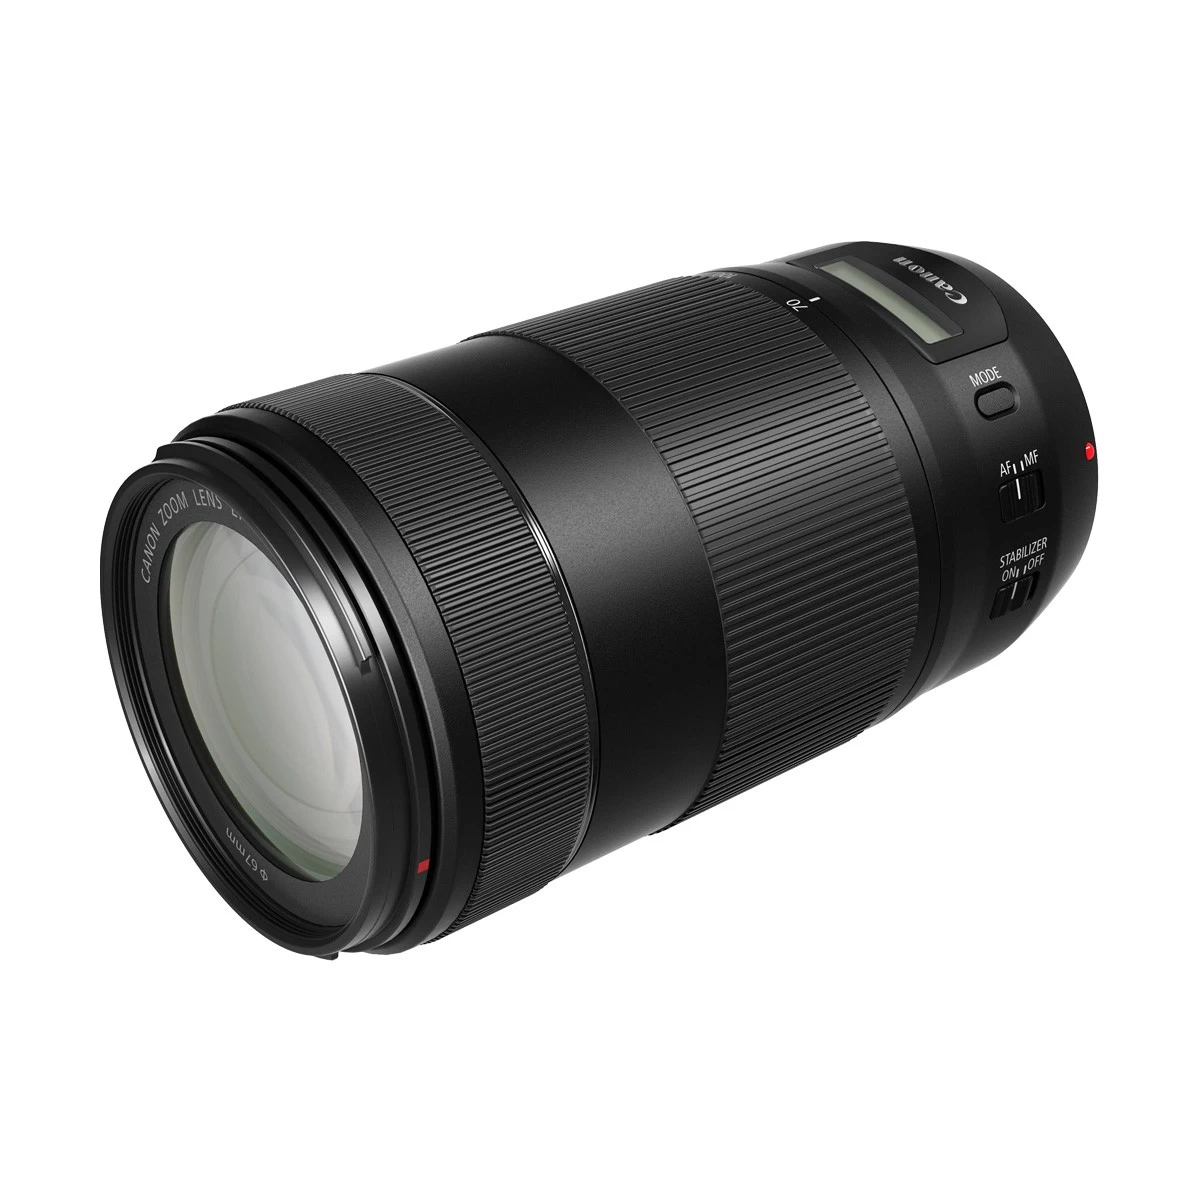 Canon EF 70-300mm f/4-5.6 IS II USM Camera Lens price in BD